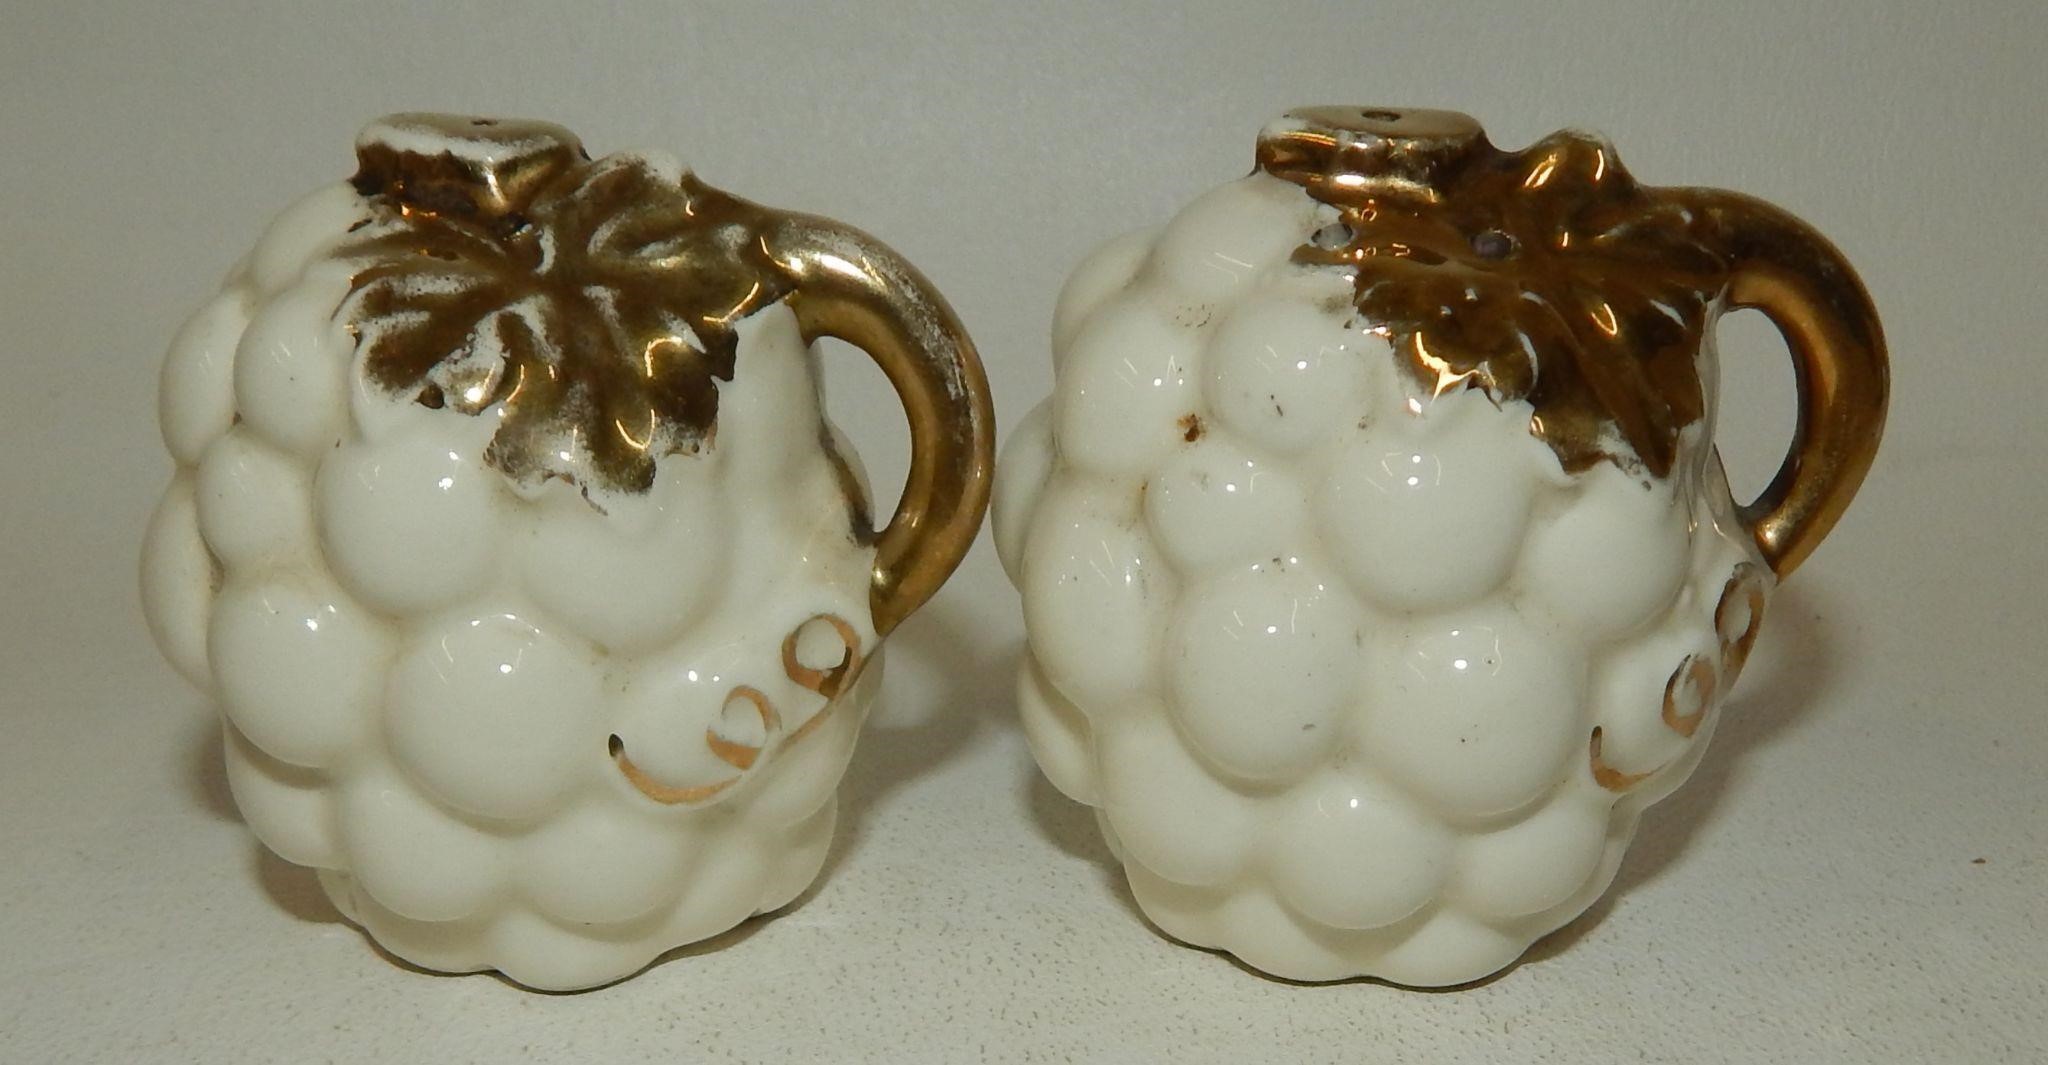 Vintage White Grape Pitchers with Gold Accent